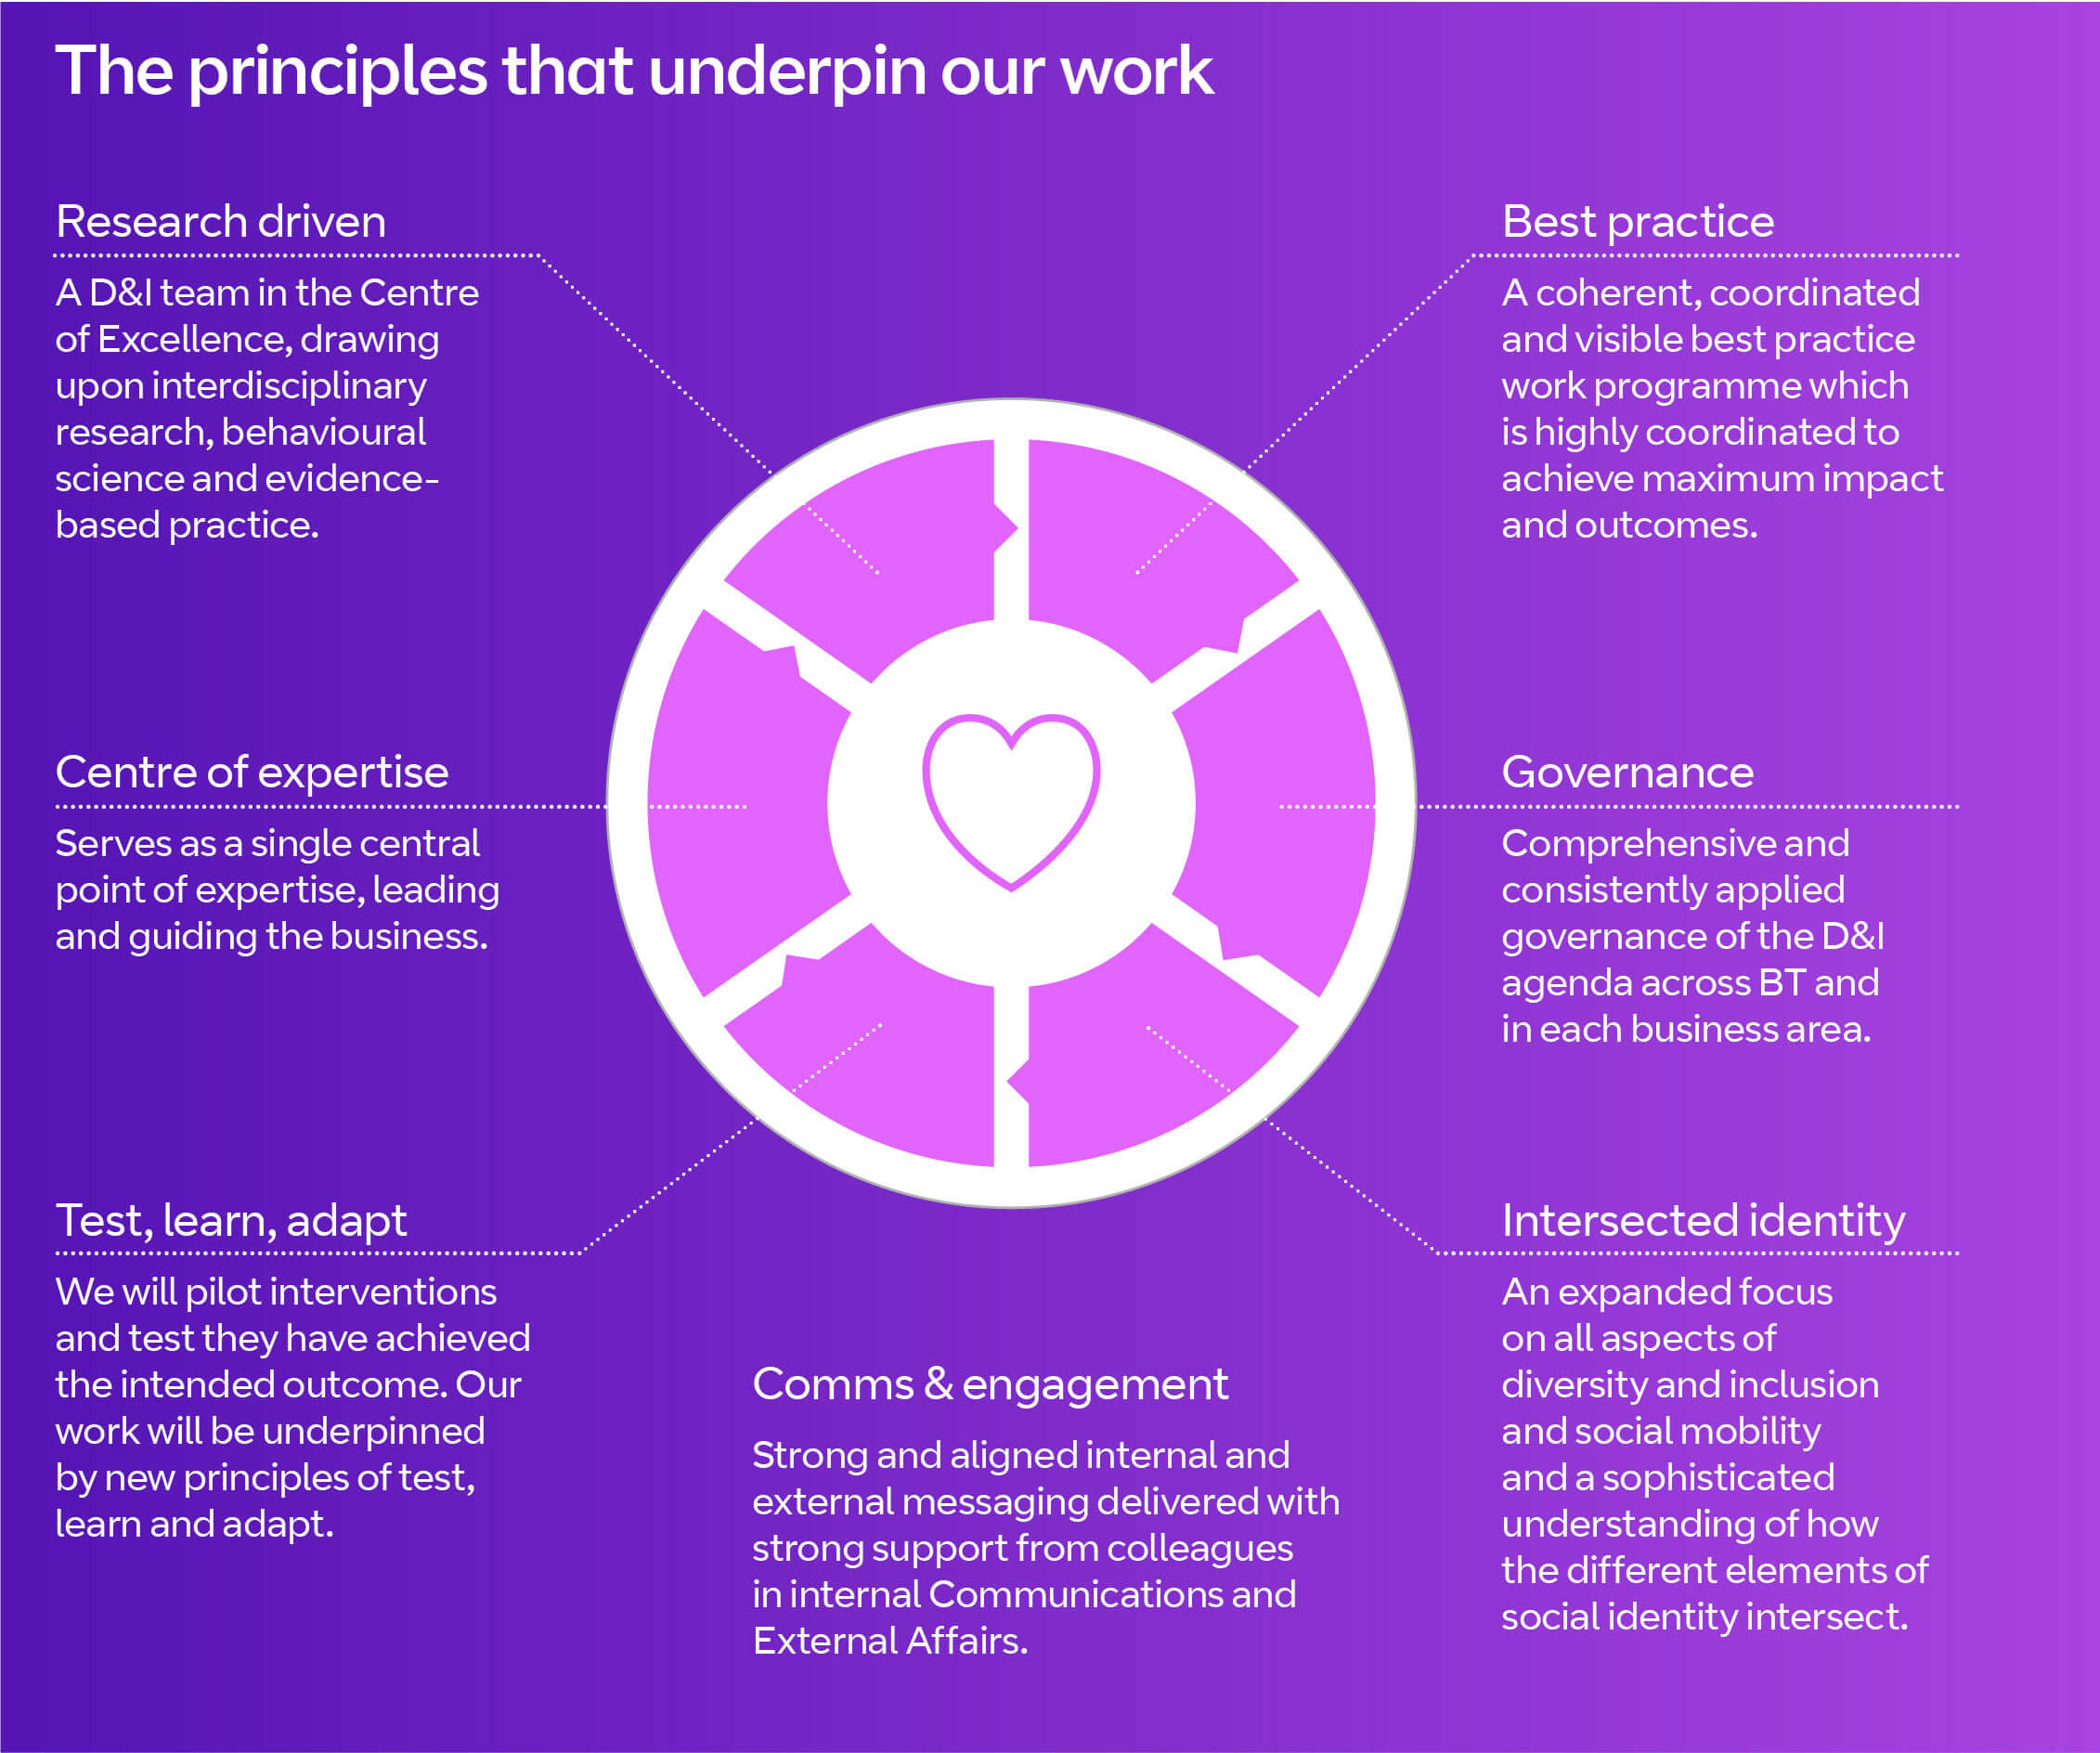 The principles that underpin our work